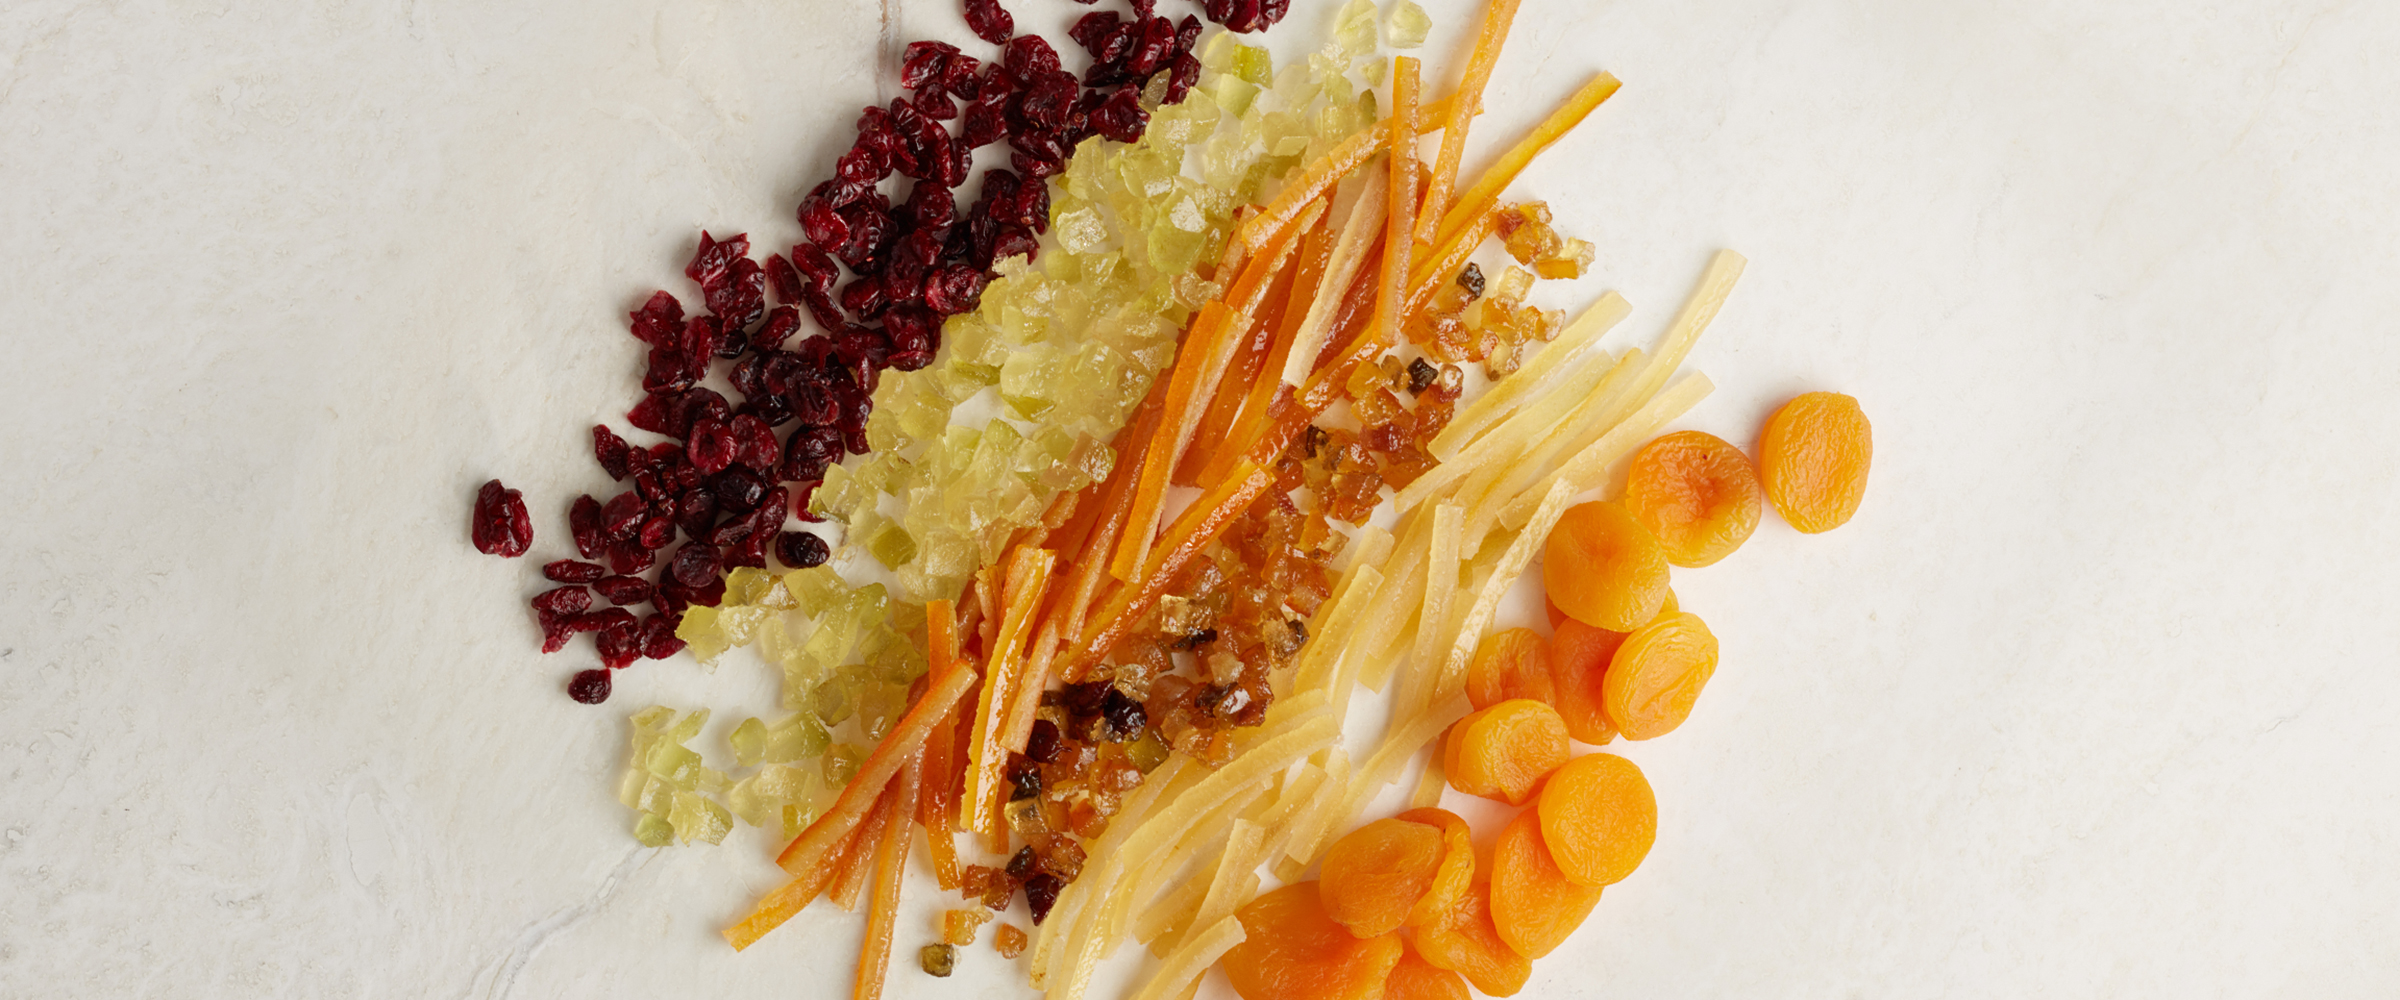 Dried and Candied Fruits